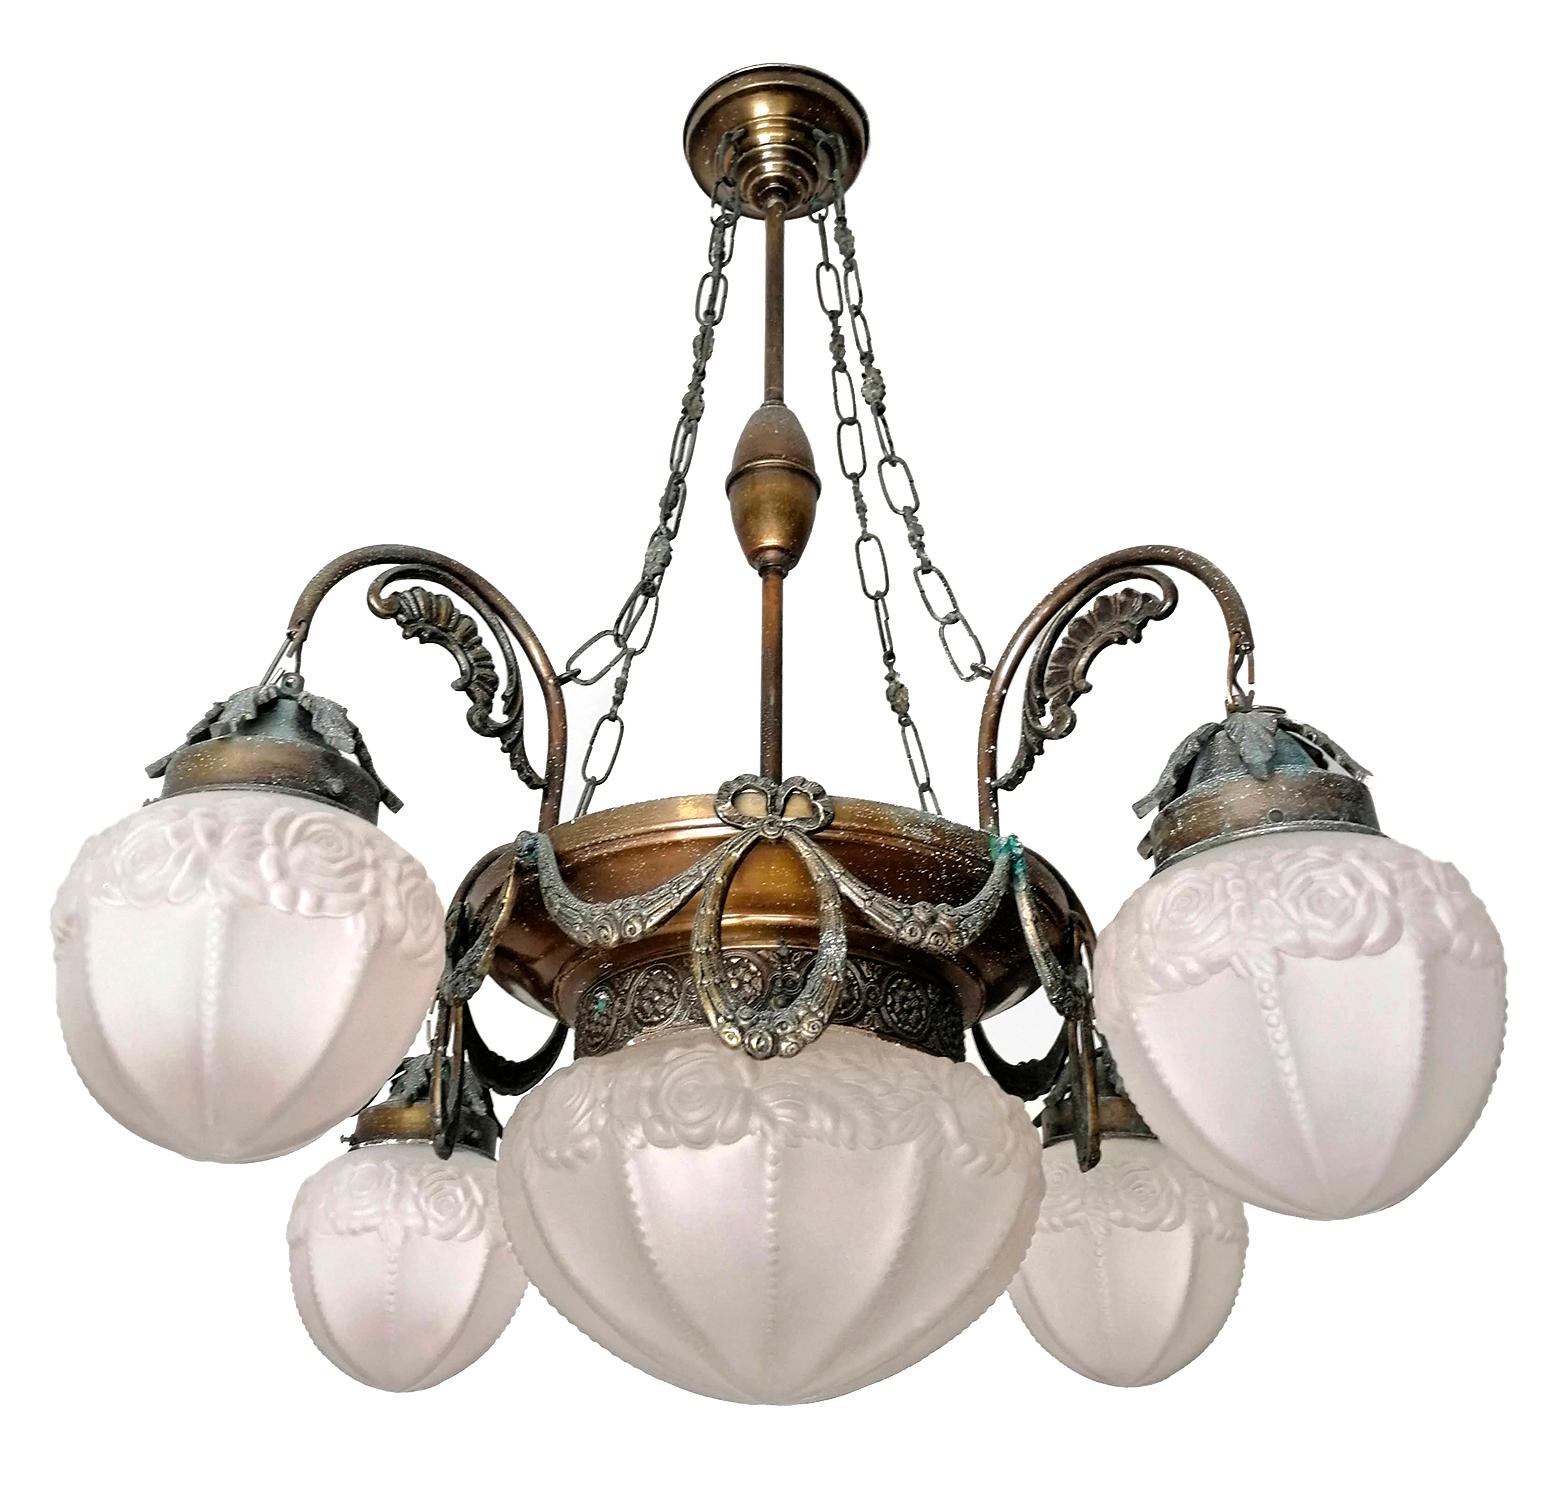 French Art Deco and Art Nouveau chandelier in frosted pale pink glass and brass with garlands. 
Age patina
Dimensions
Height: 31.5 in. (80 cm)
Diameter: 28.35 in. (72 cm)
Five light bulbs (four bulbs E14 40W and one bulb E27 60W)
Good working